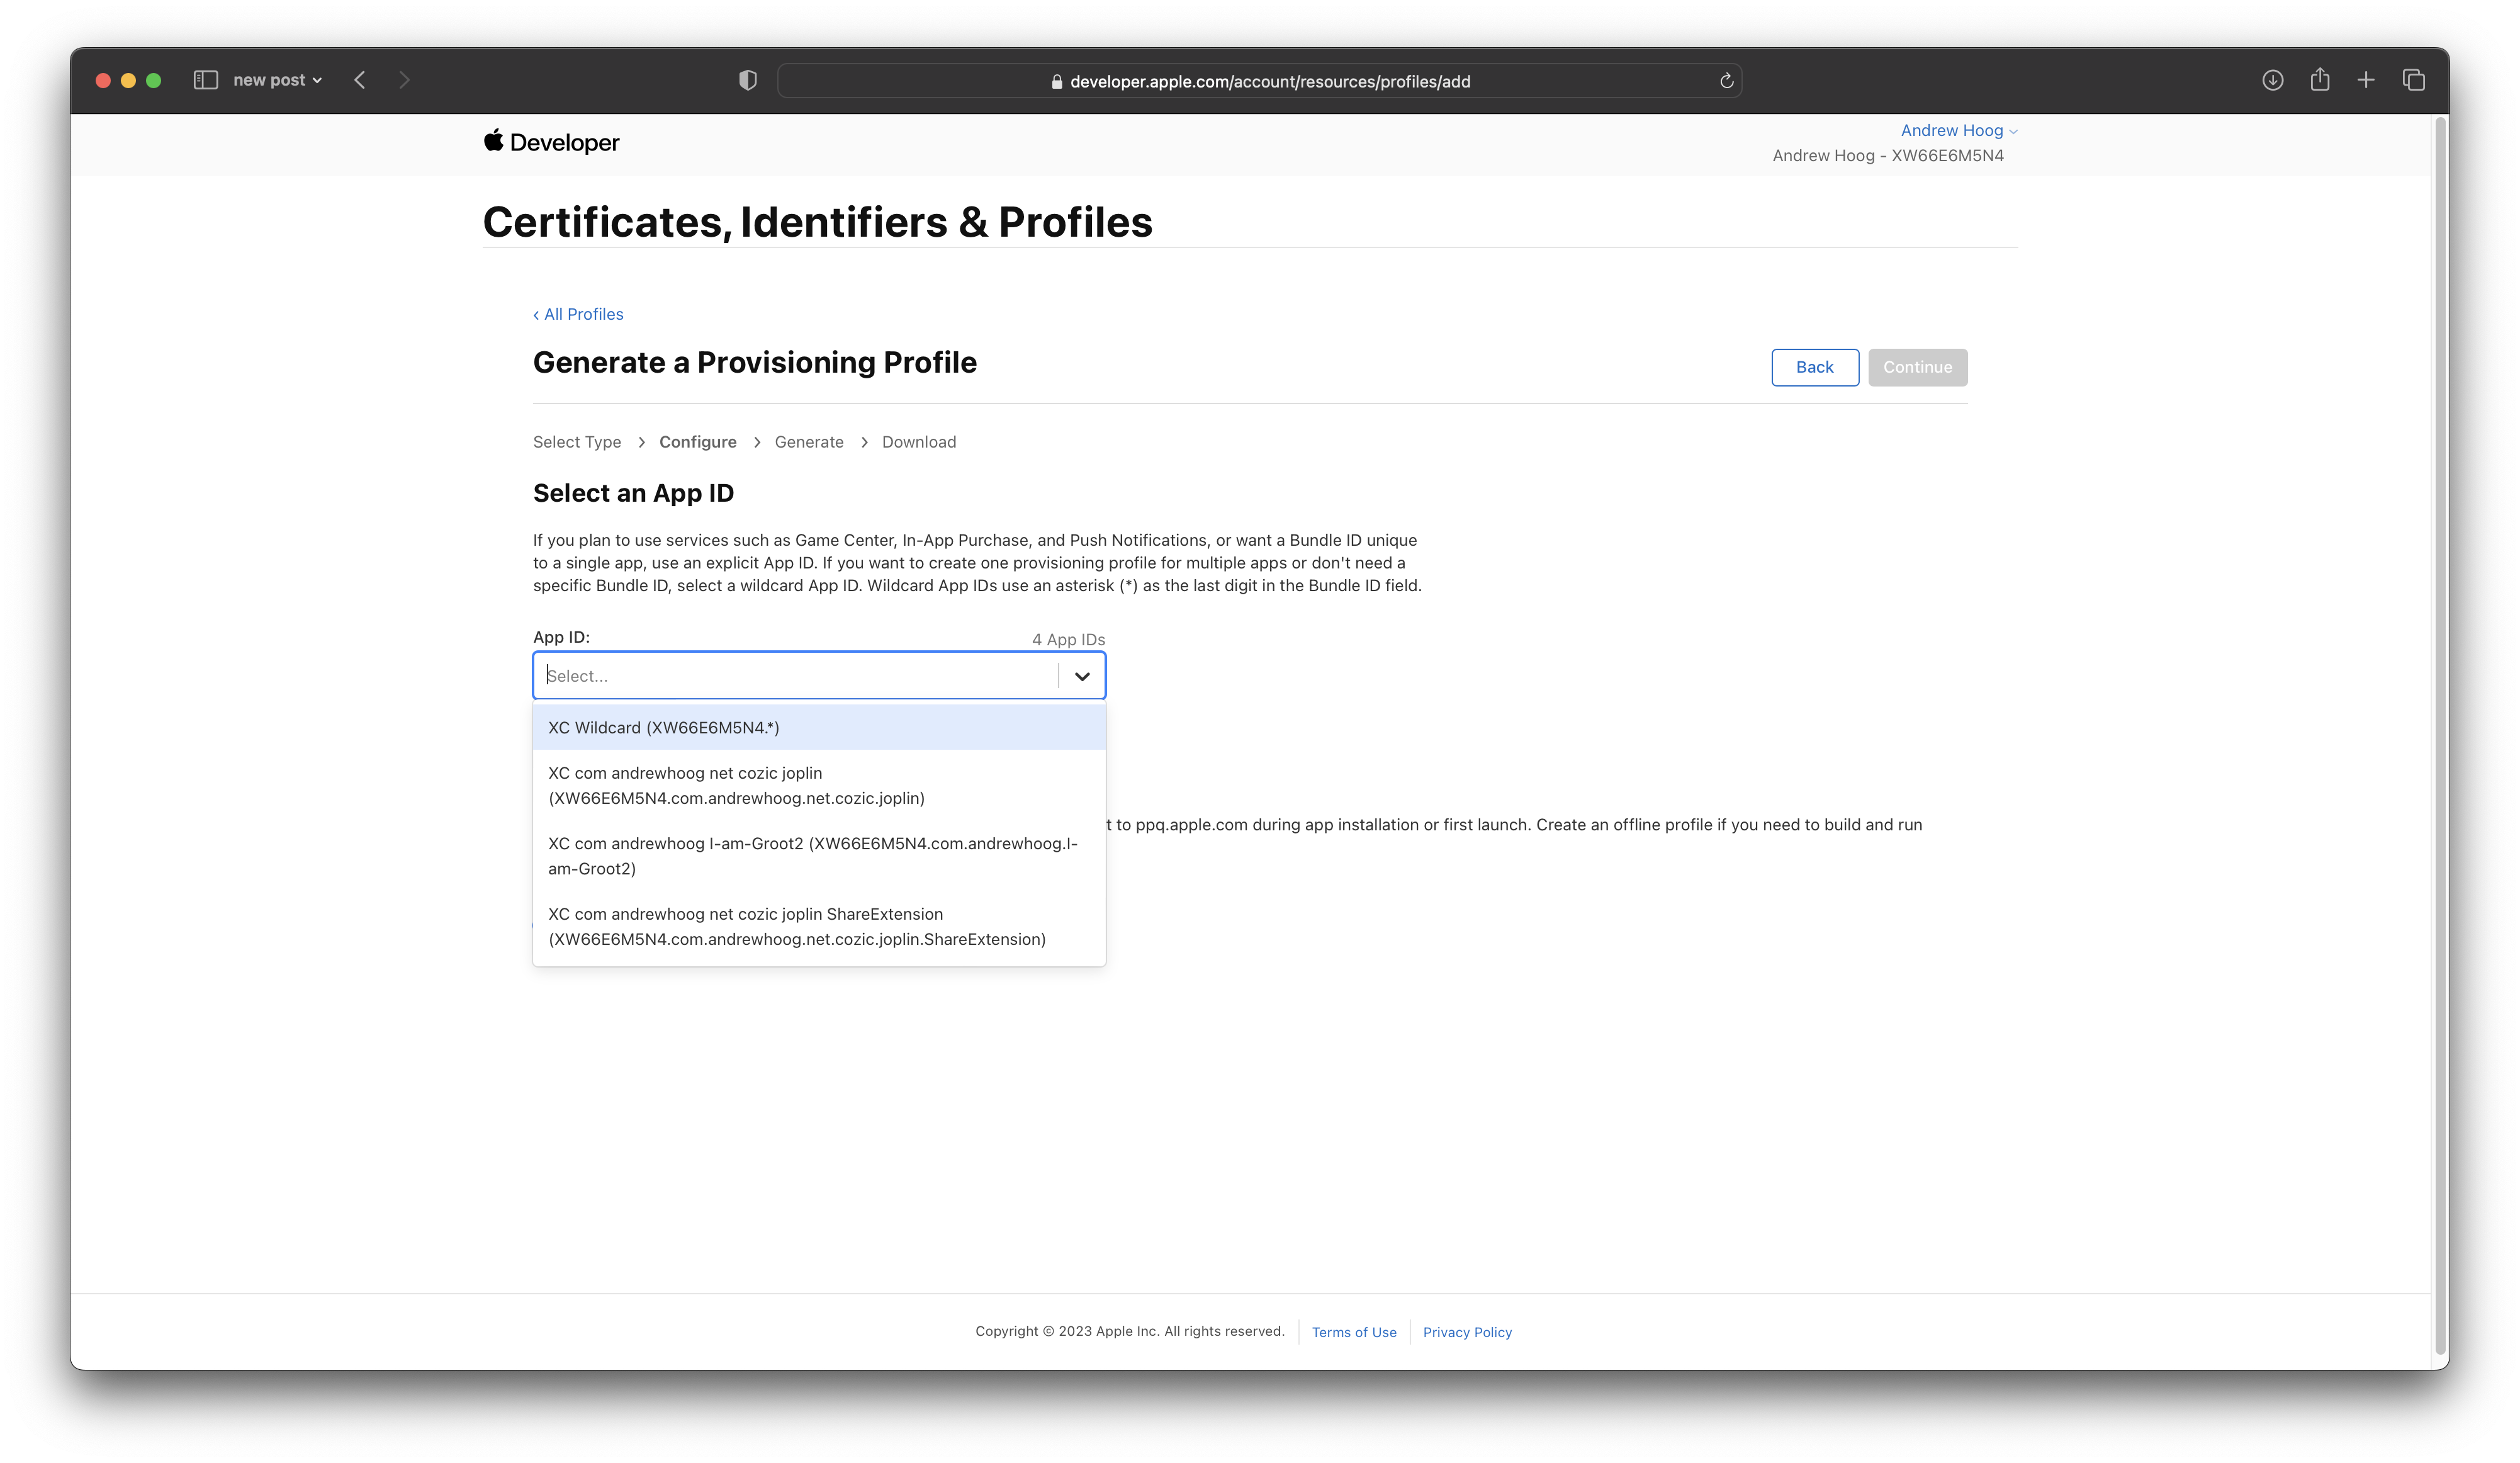 Select App ID for provisioning profile